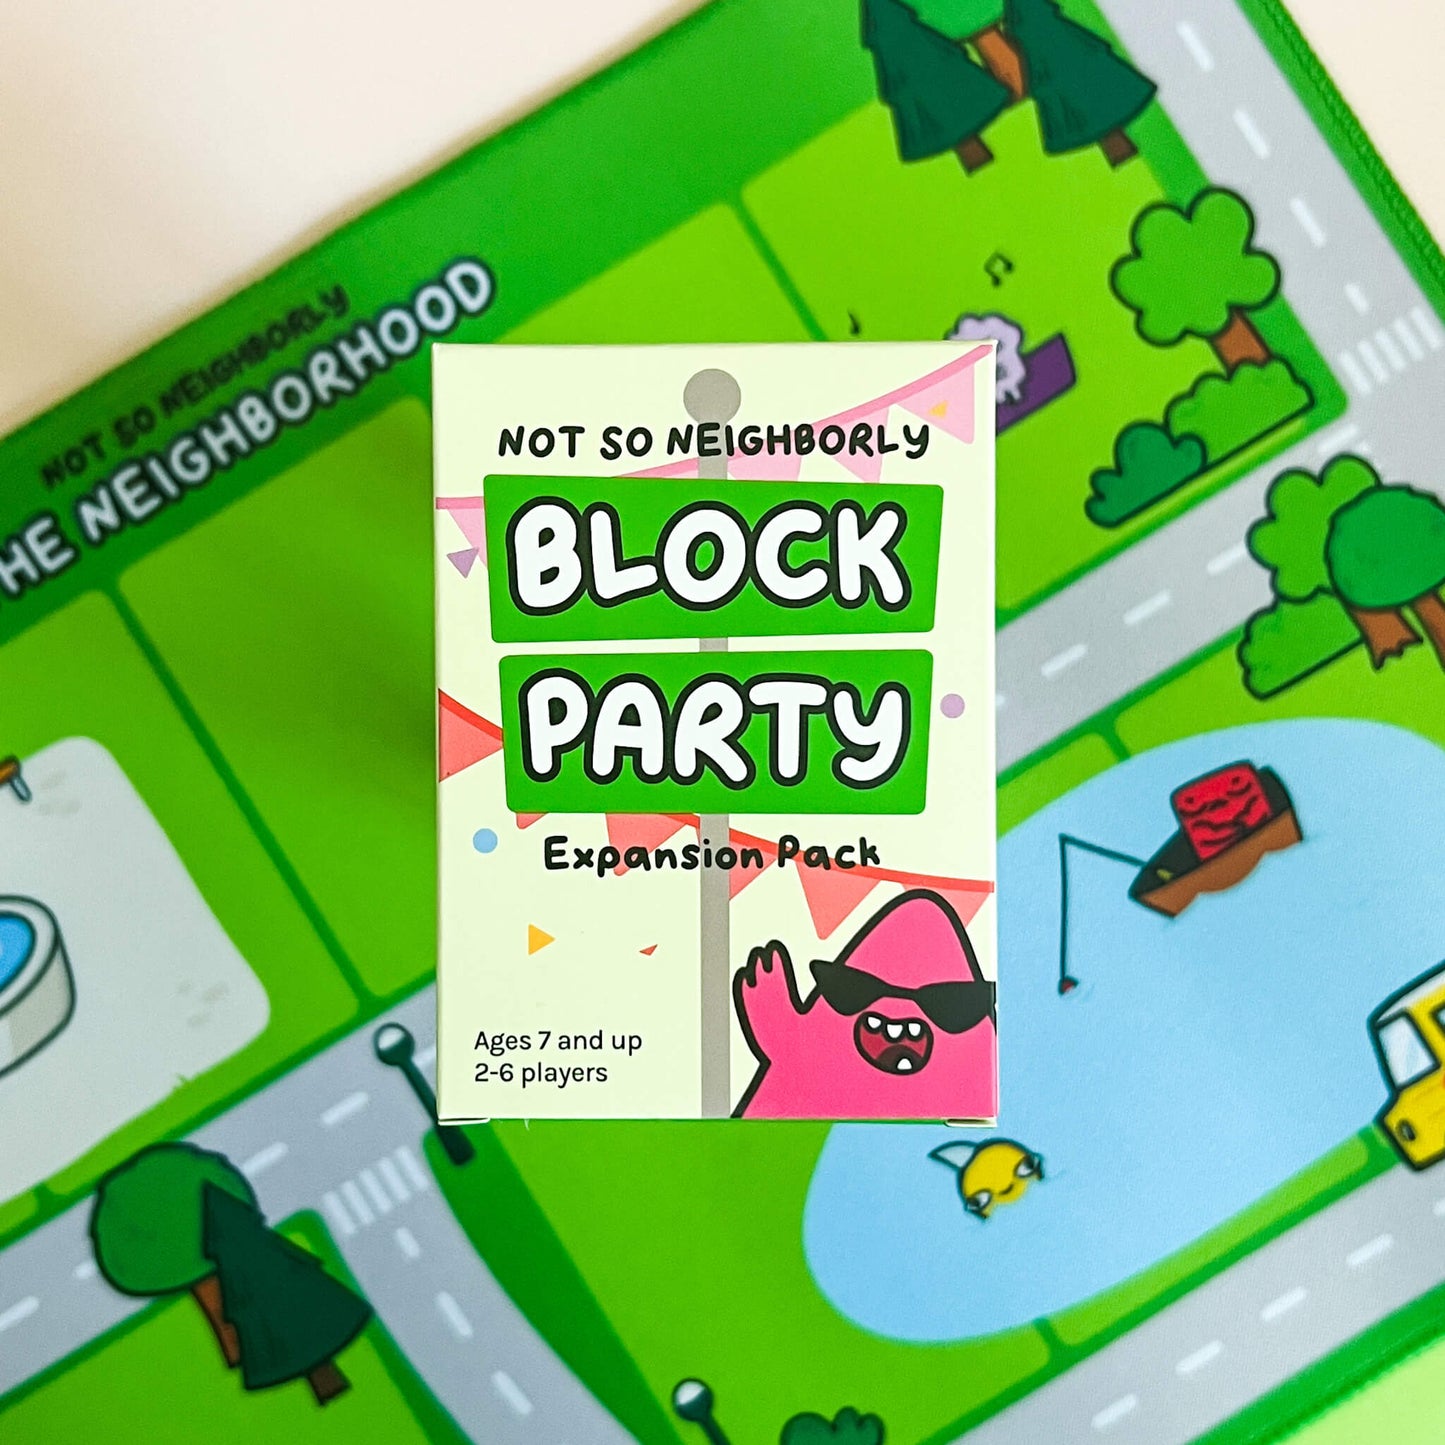 Block Party (expansion pack)